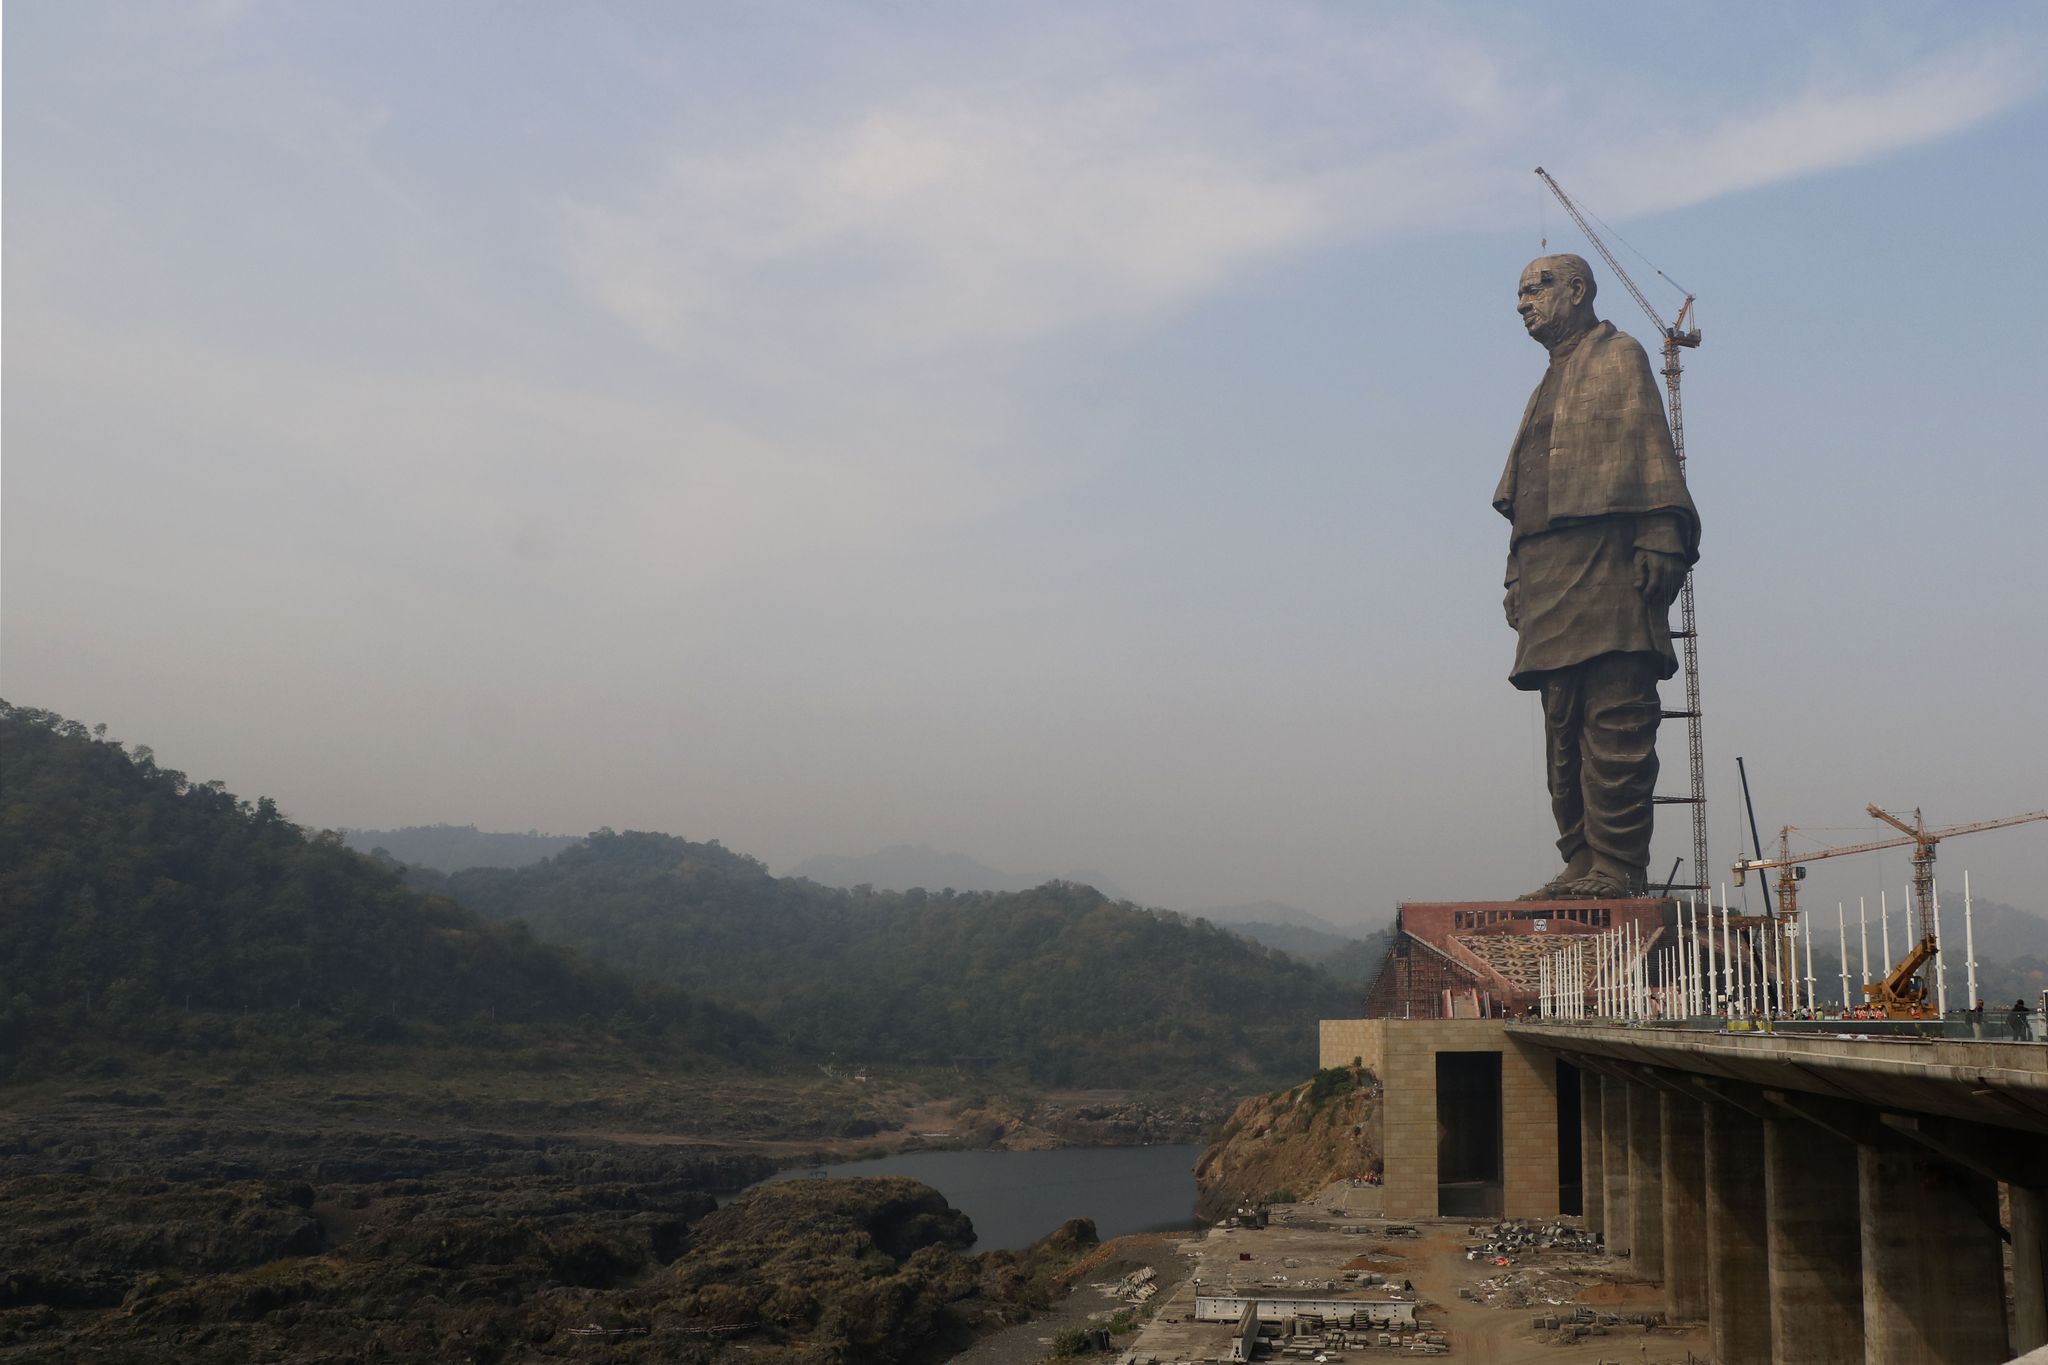 Gujarat Chief Minister Vijay Rupani Visits Statue Of Unity Site Ahead Of Unveiling By Prime Minister Narendra Modi